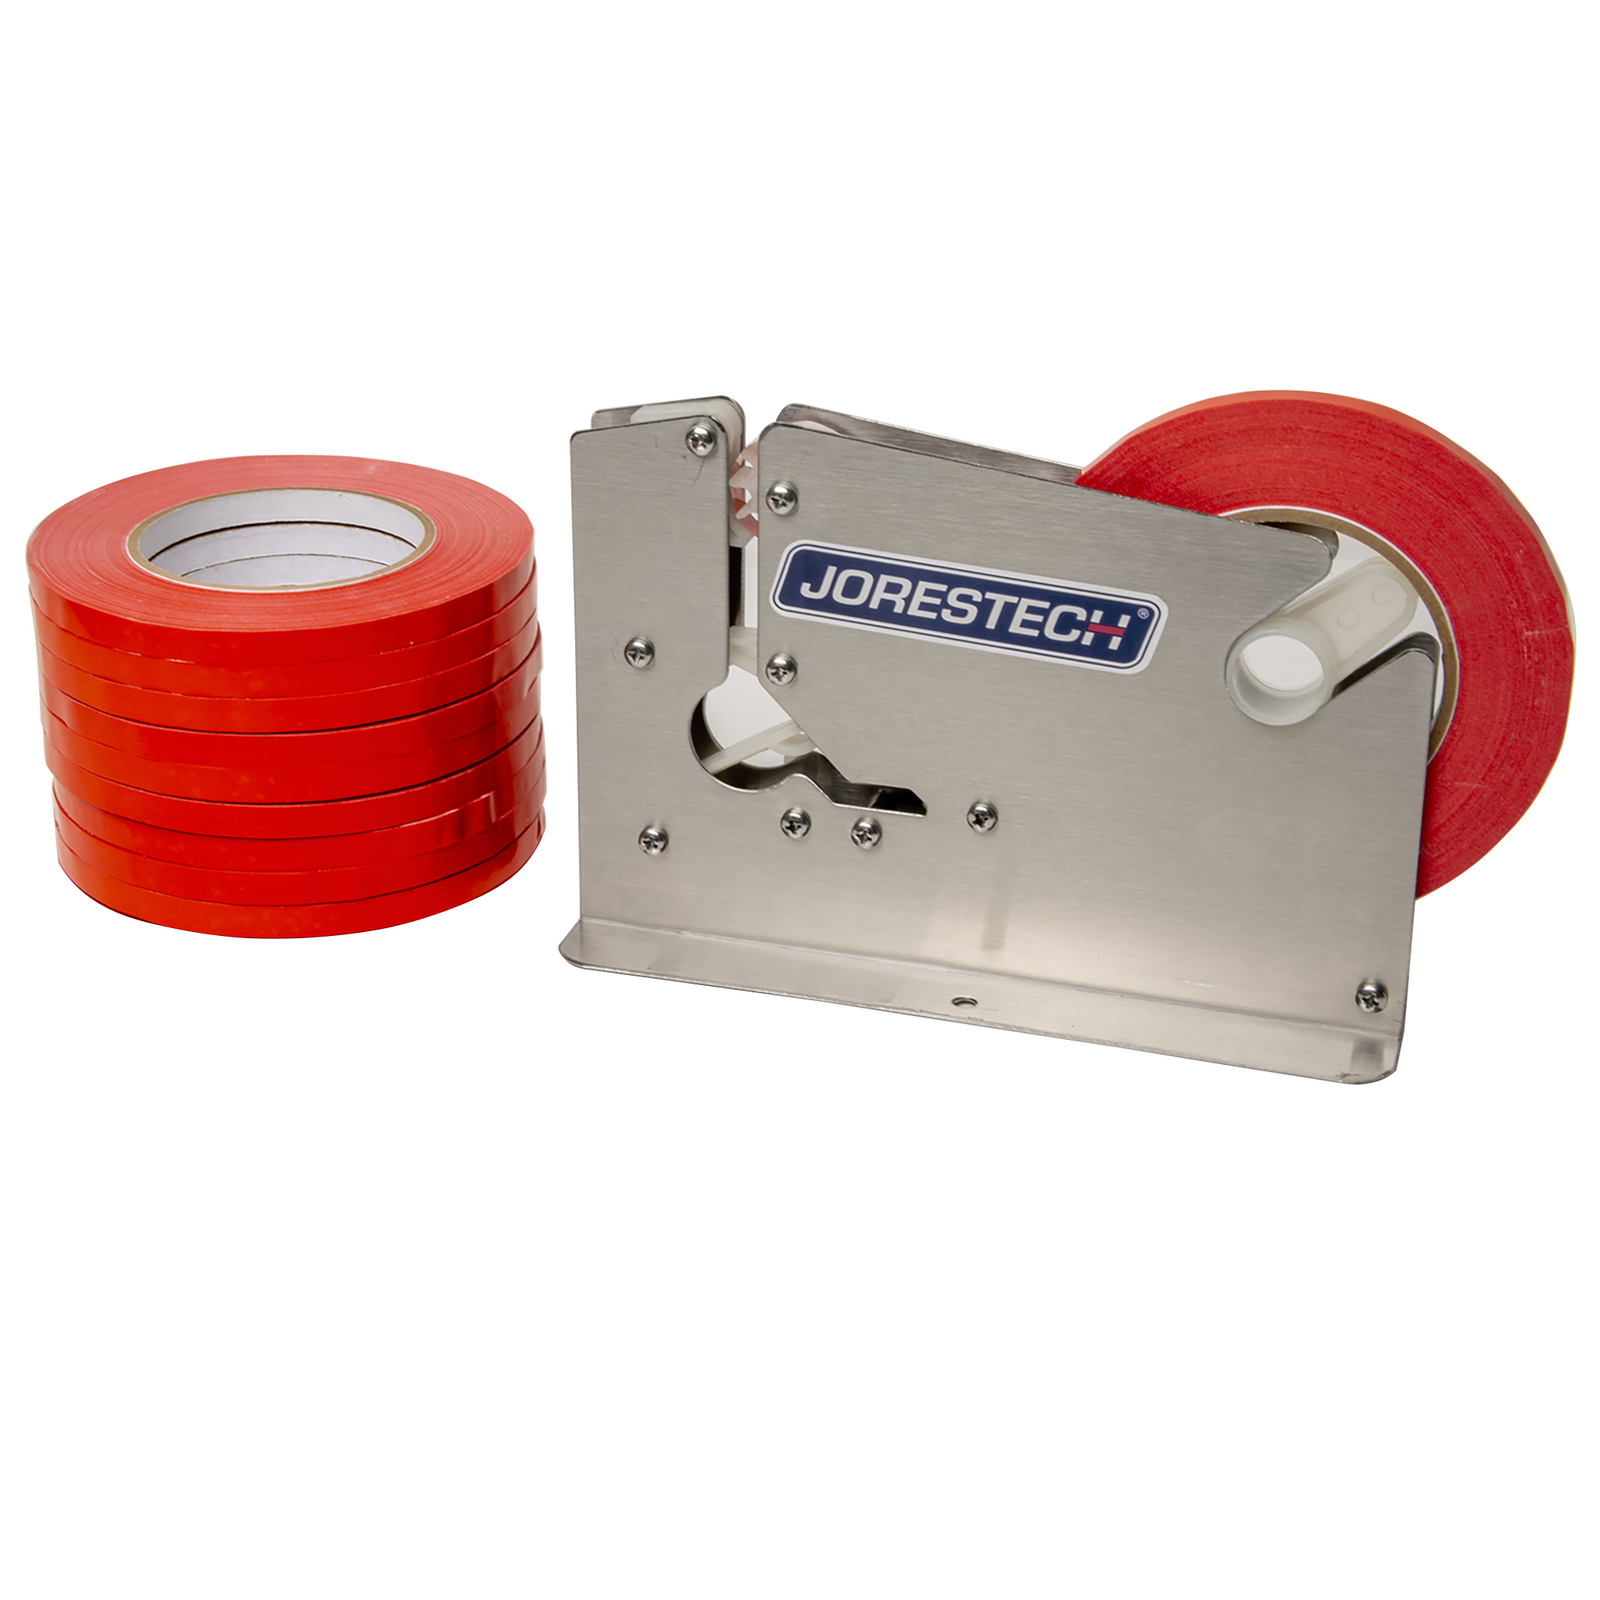 A stainless steel bag closer next to 10 adhesive red tape rolls